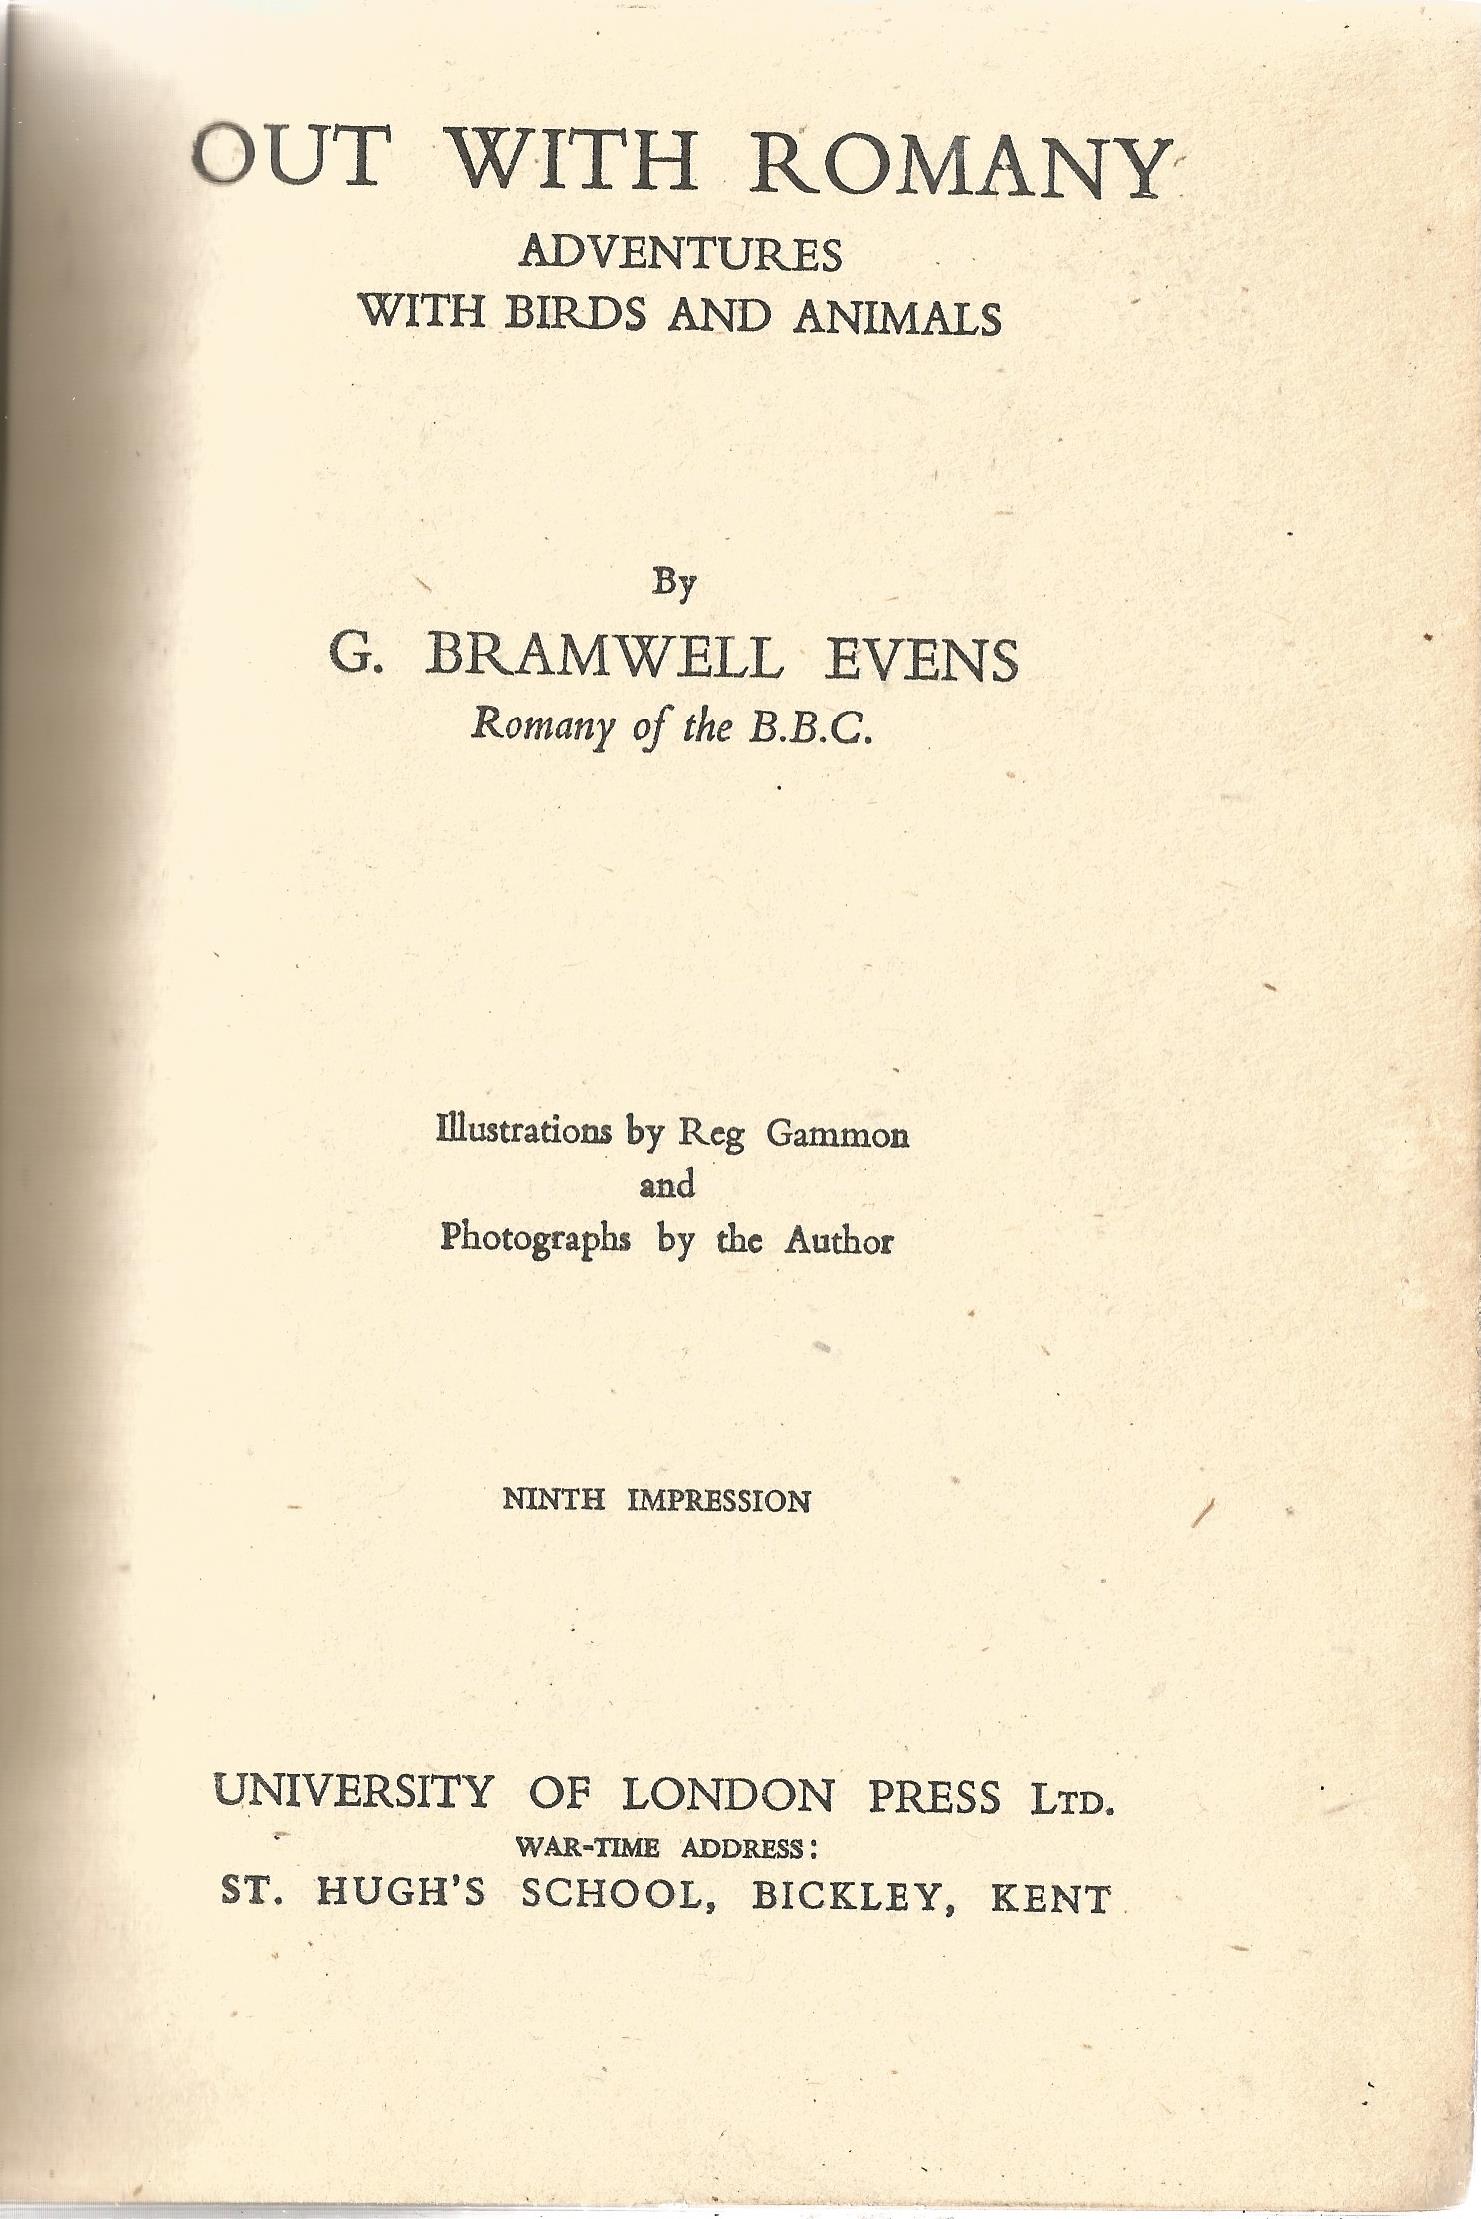 G Bramwell Evens (Romany of the BBC) hardback book Out With Romany 1943 published by University of - Image 2 of 2